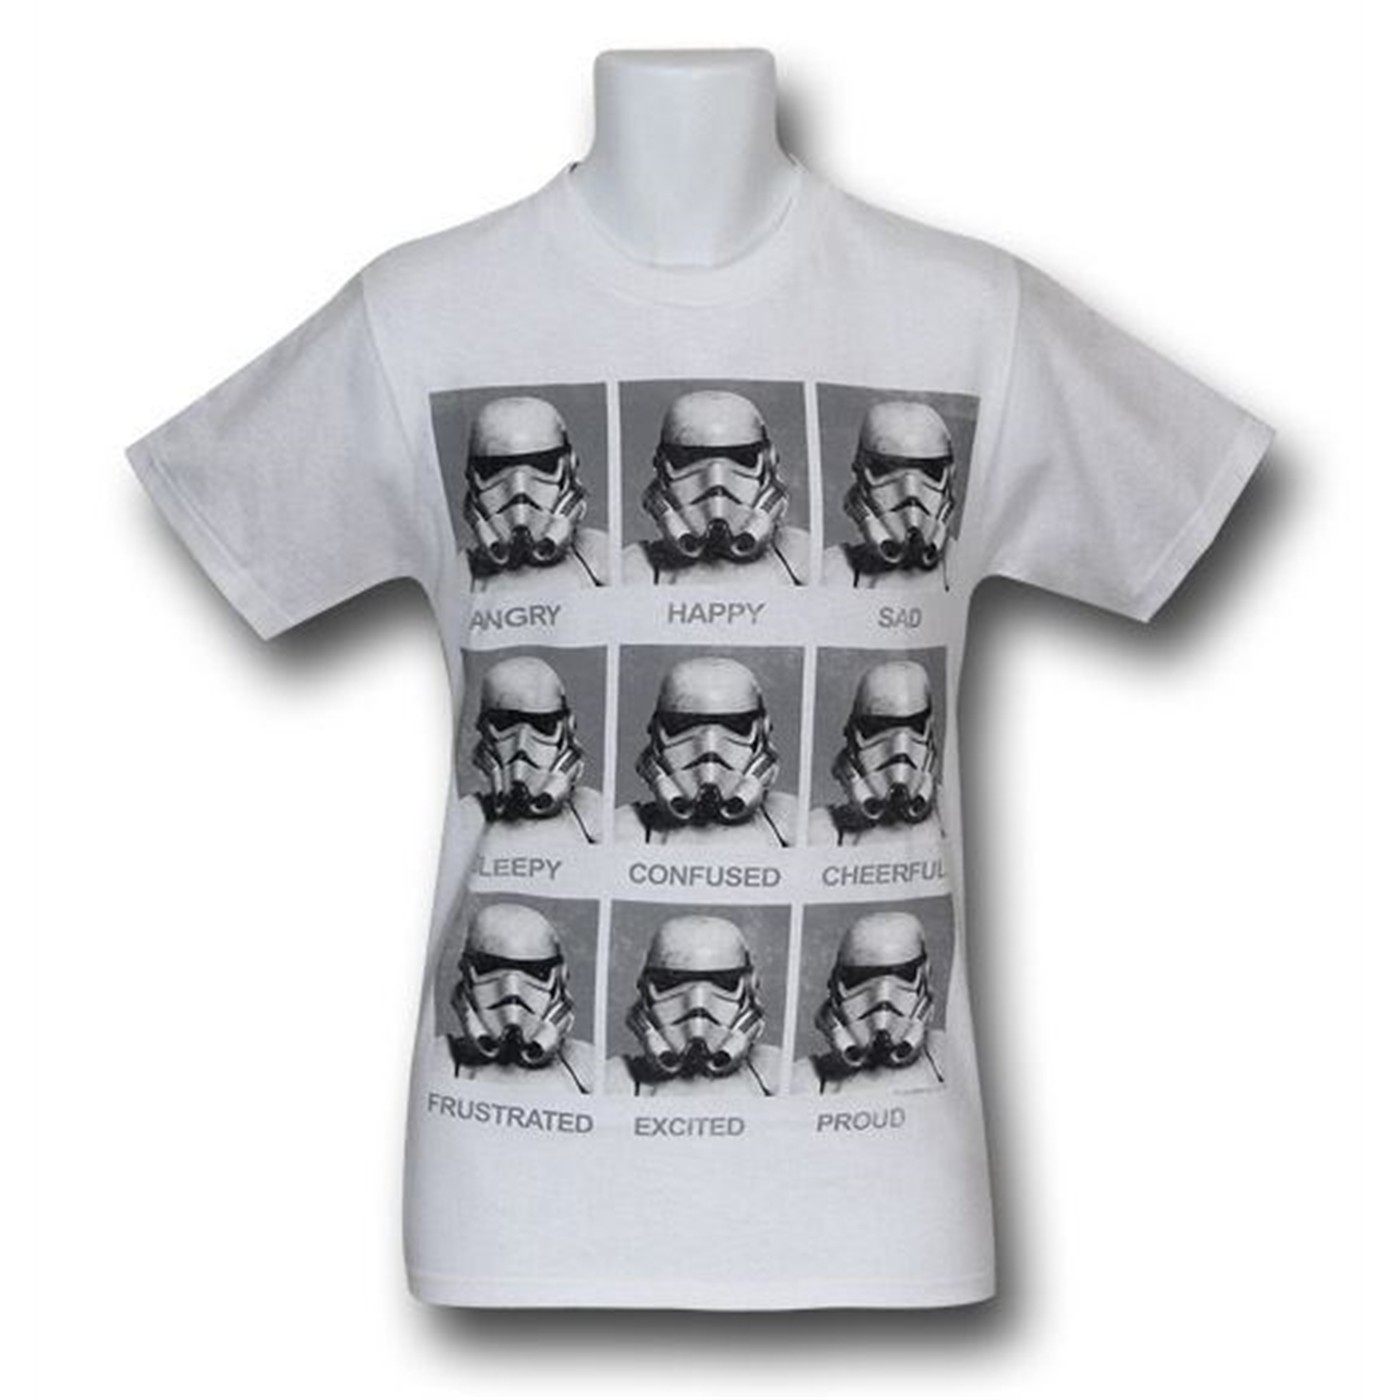 Stormtroopers 'Today I Am' T-Shirt